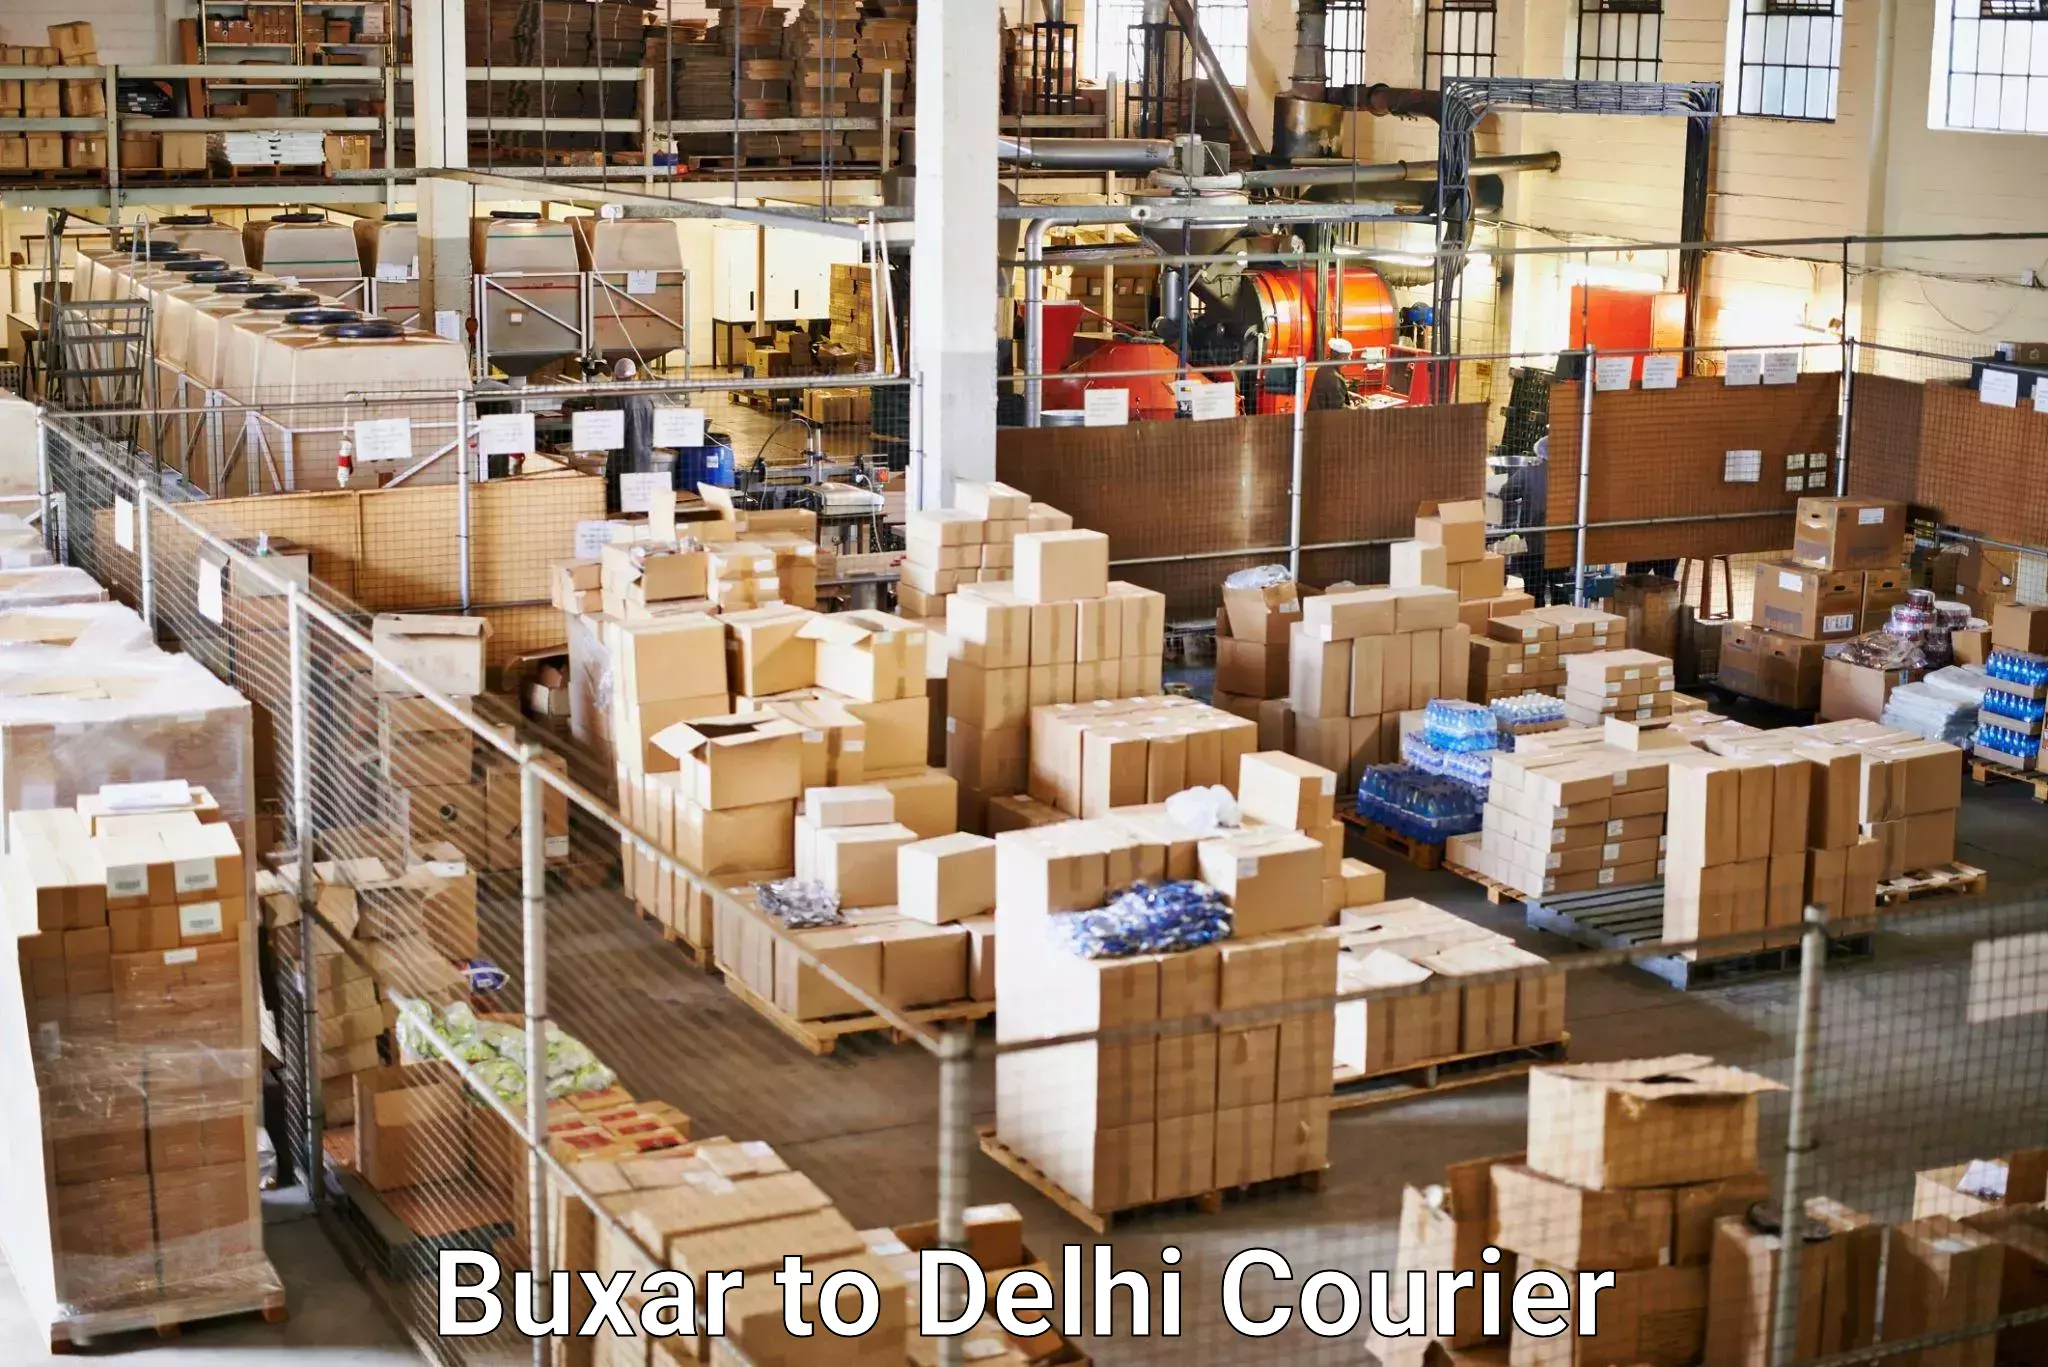 24/7 shipping services Buxar to NCR